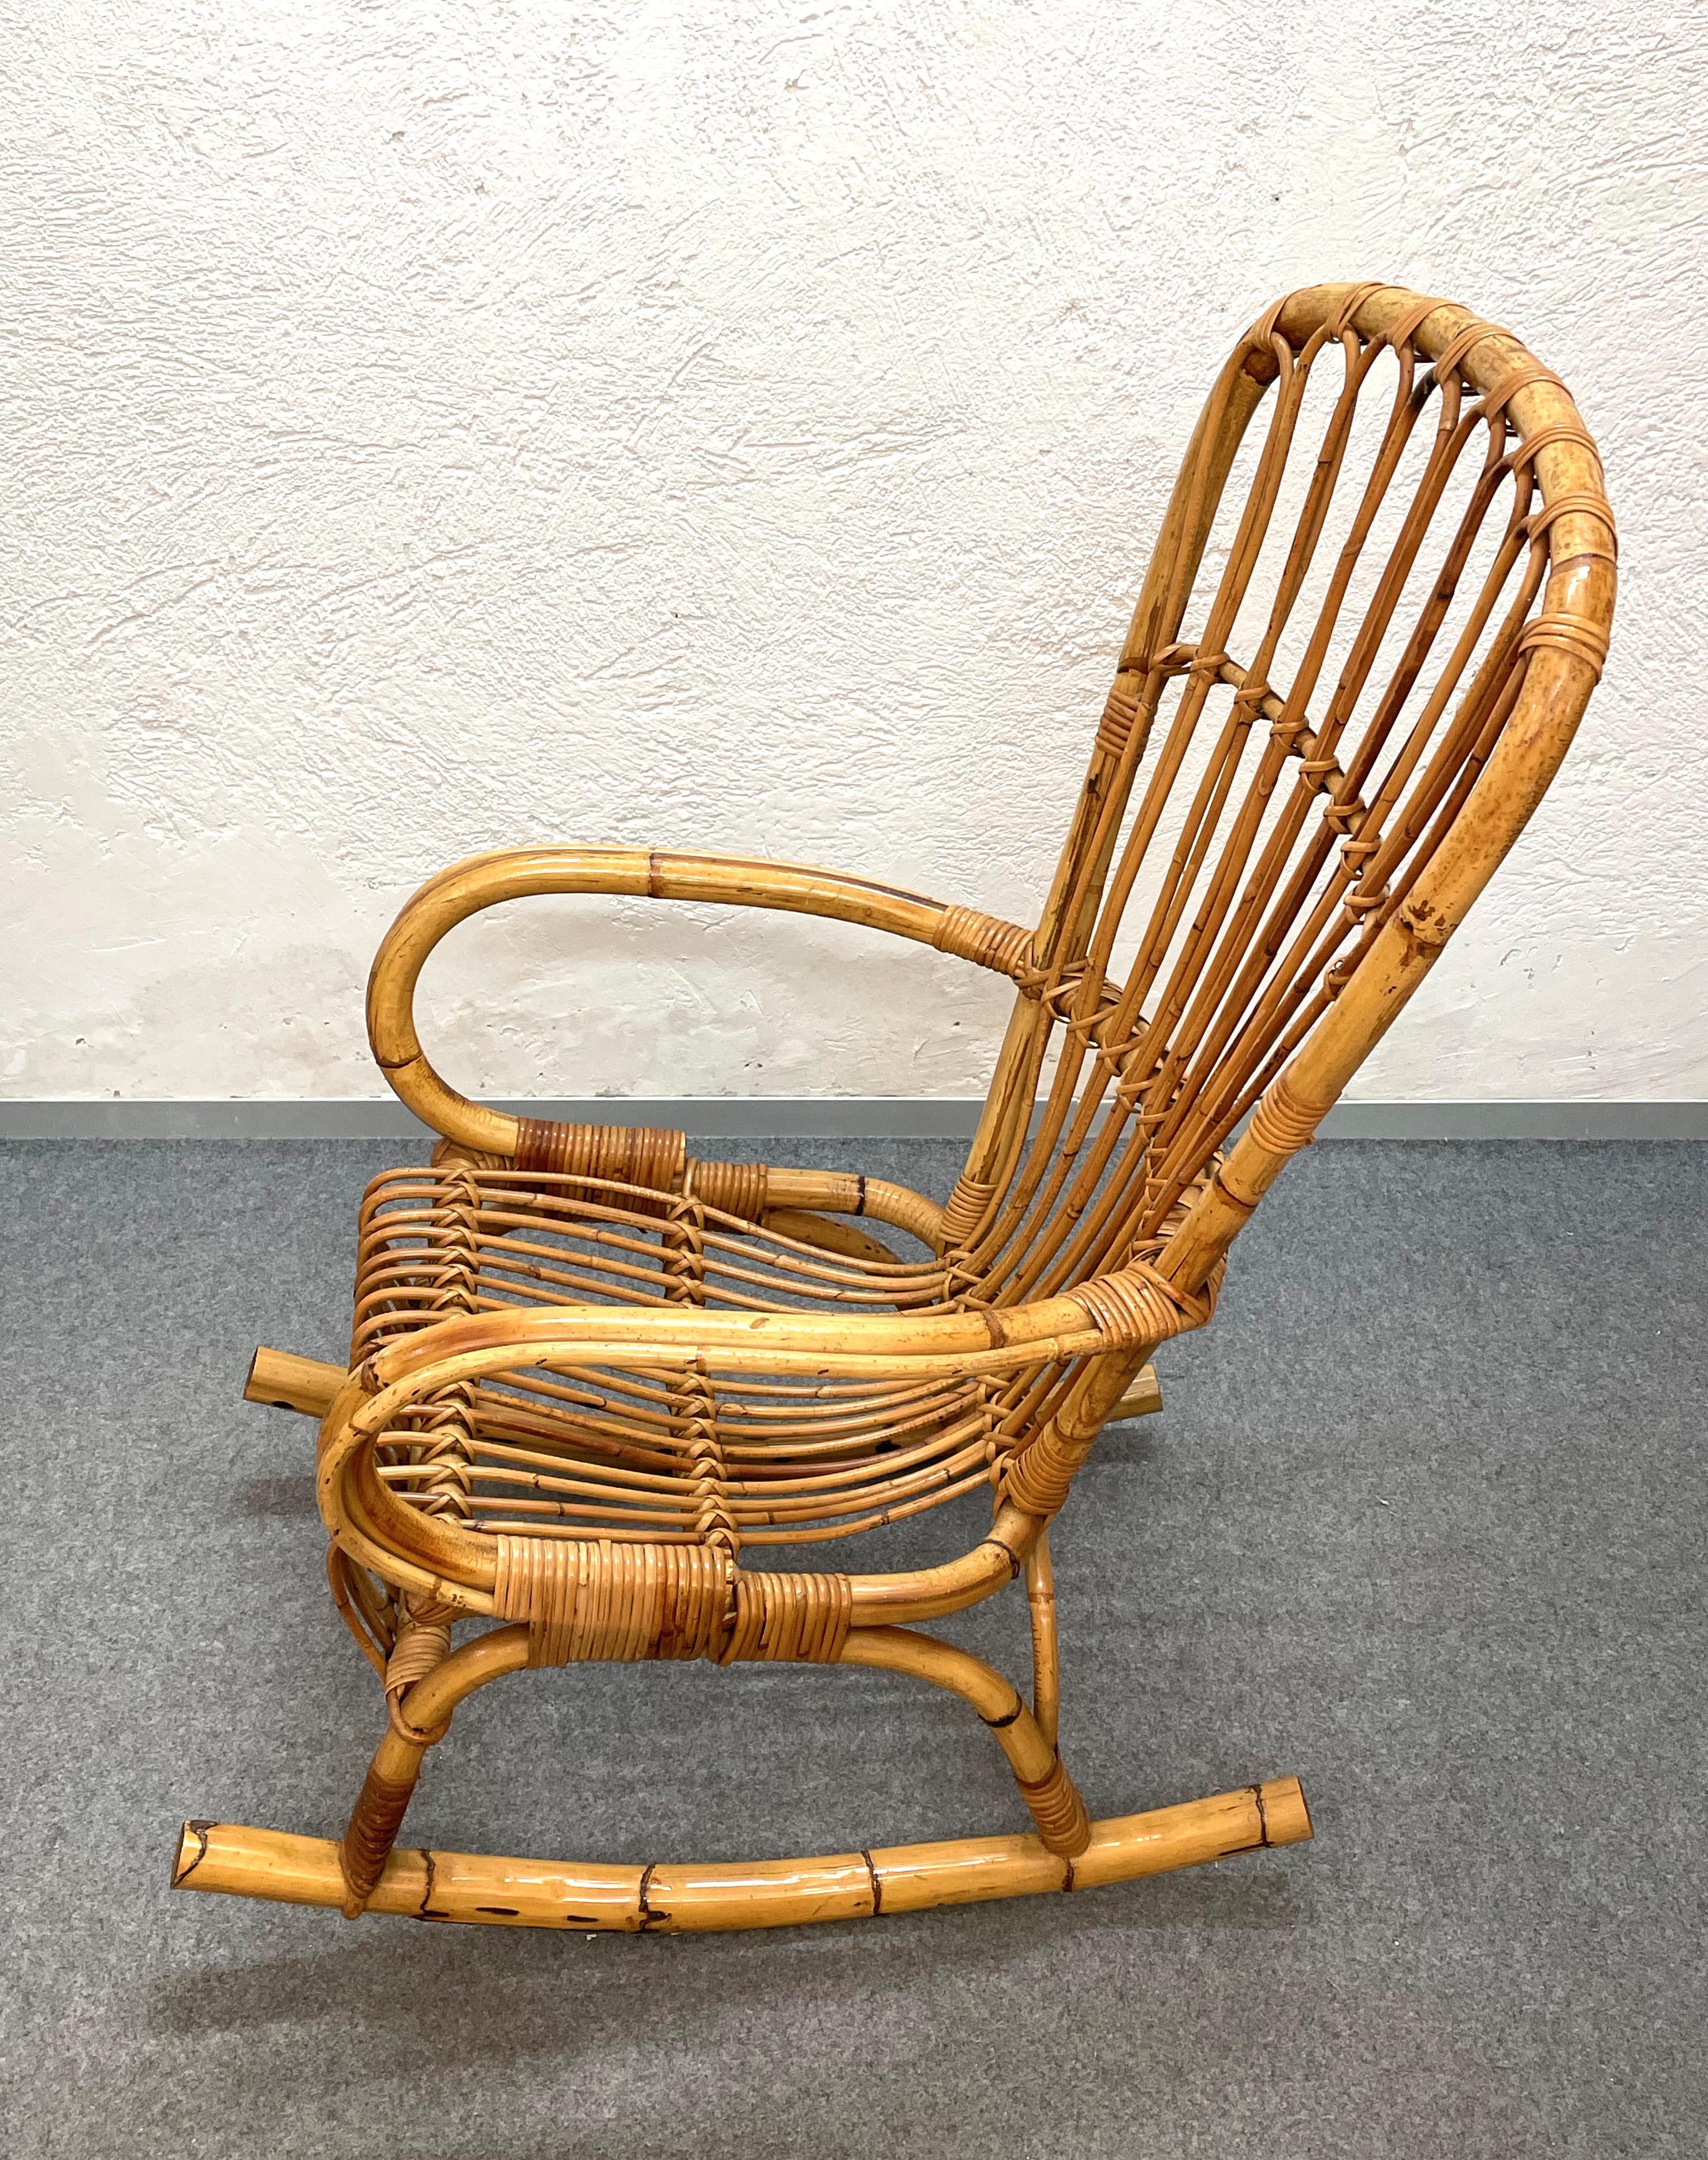 20th Century Midcentury French Riviera Rattan and Bamboo Italian Rocking Chair, 1960s For Sale